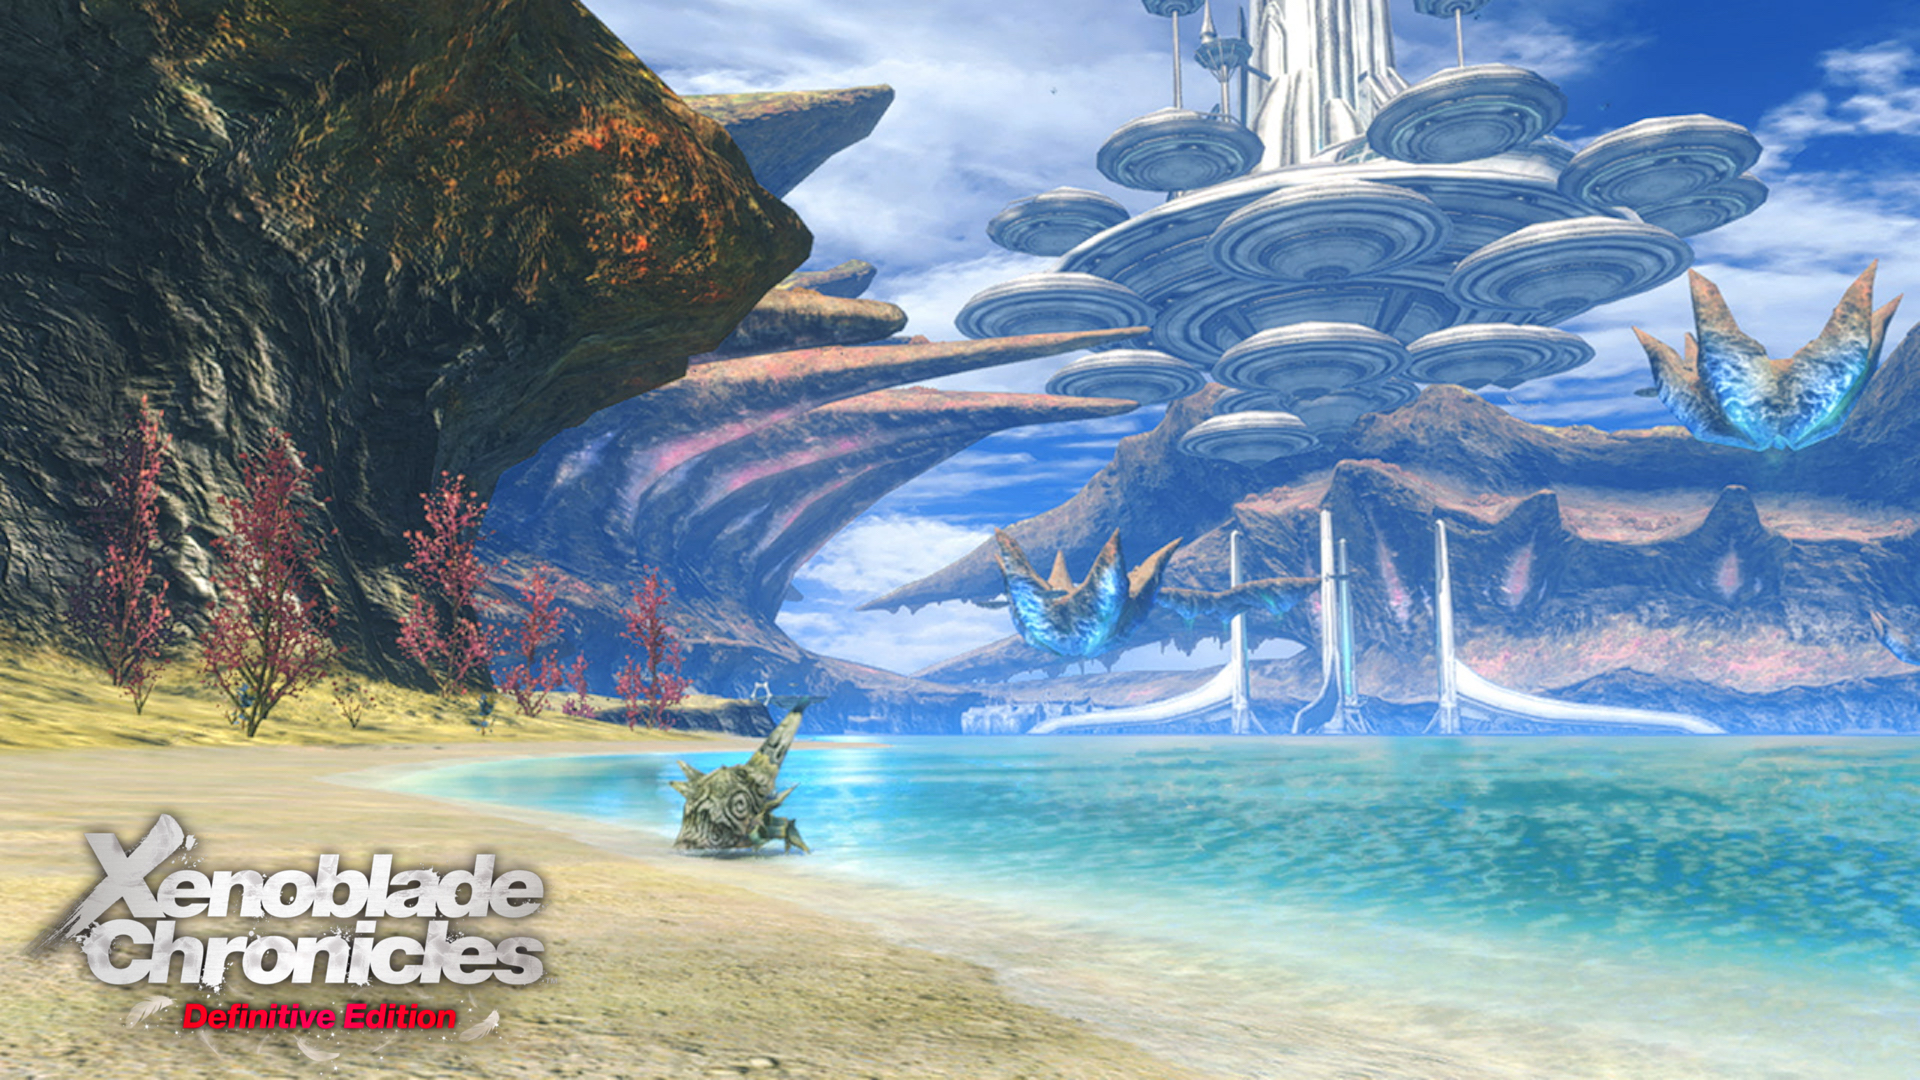 Xenoblade Chronicles Switch Image 2